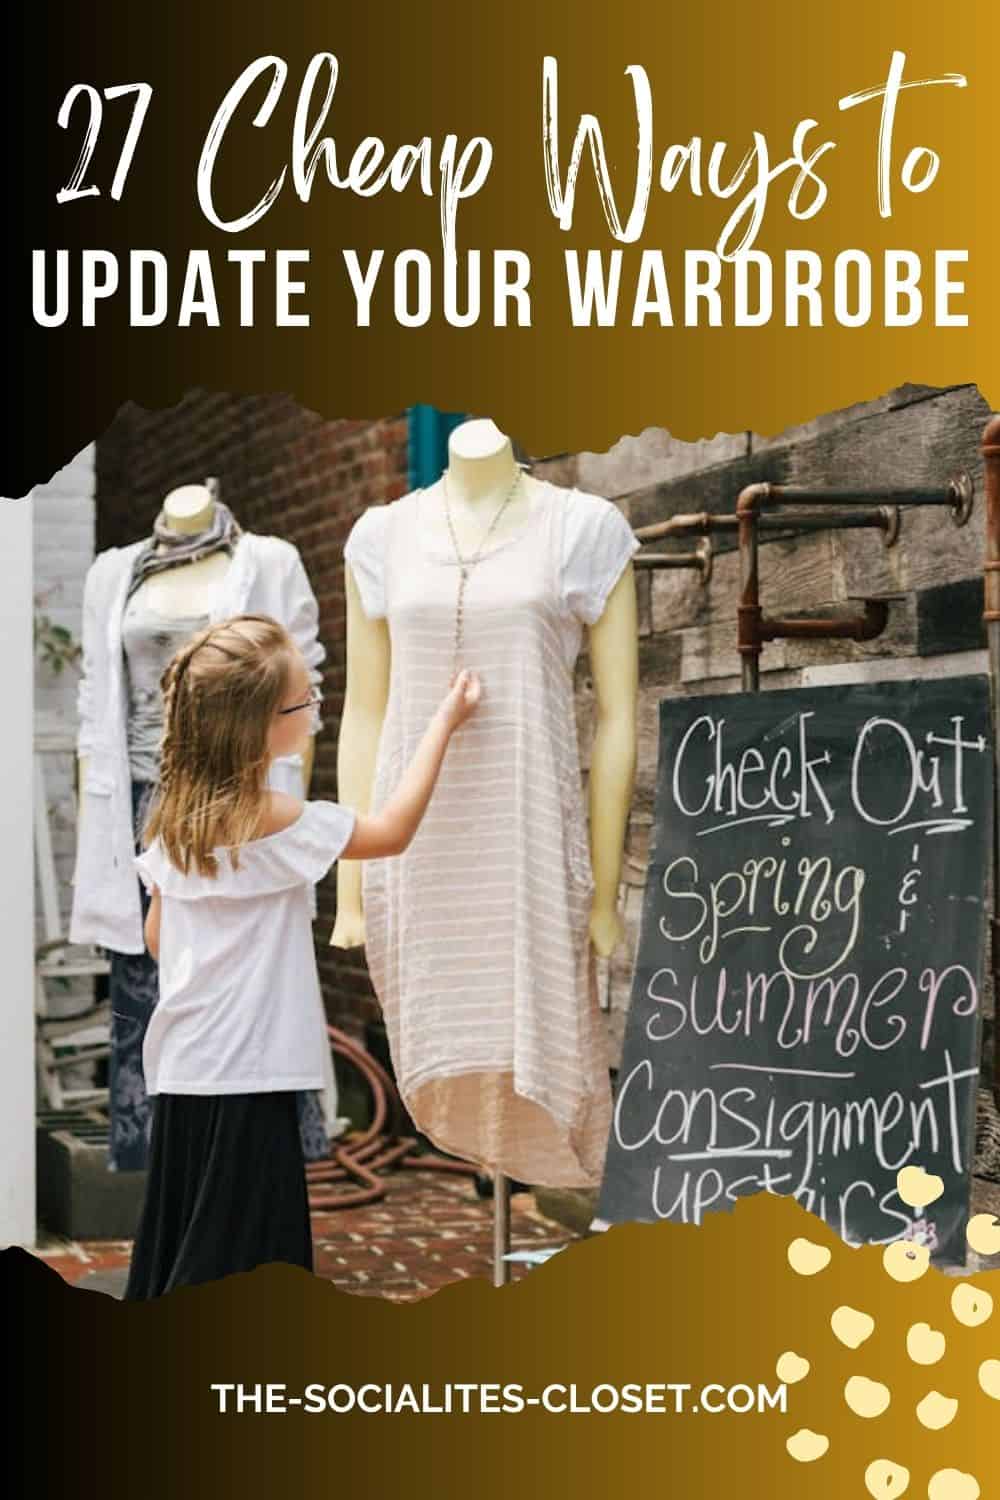 Check out these 27 cheap ways to update your wardrobe. Learn how to update your style on a budget and get the most from what you have.